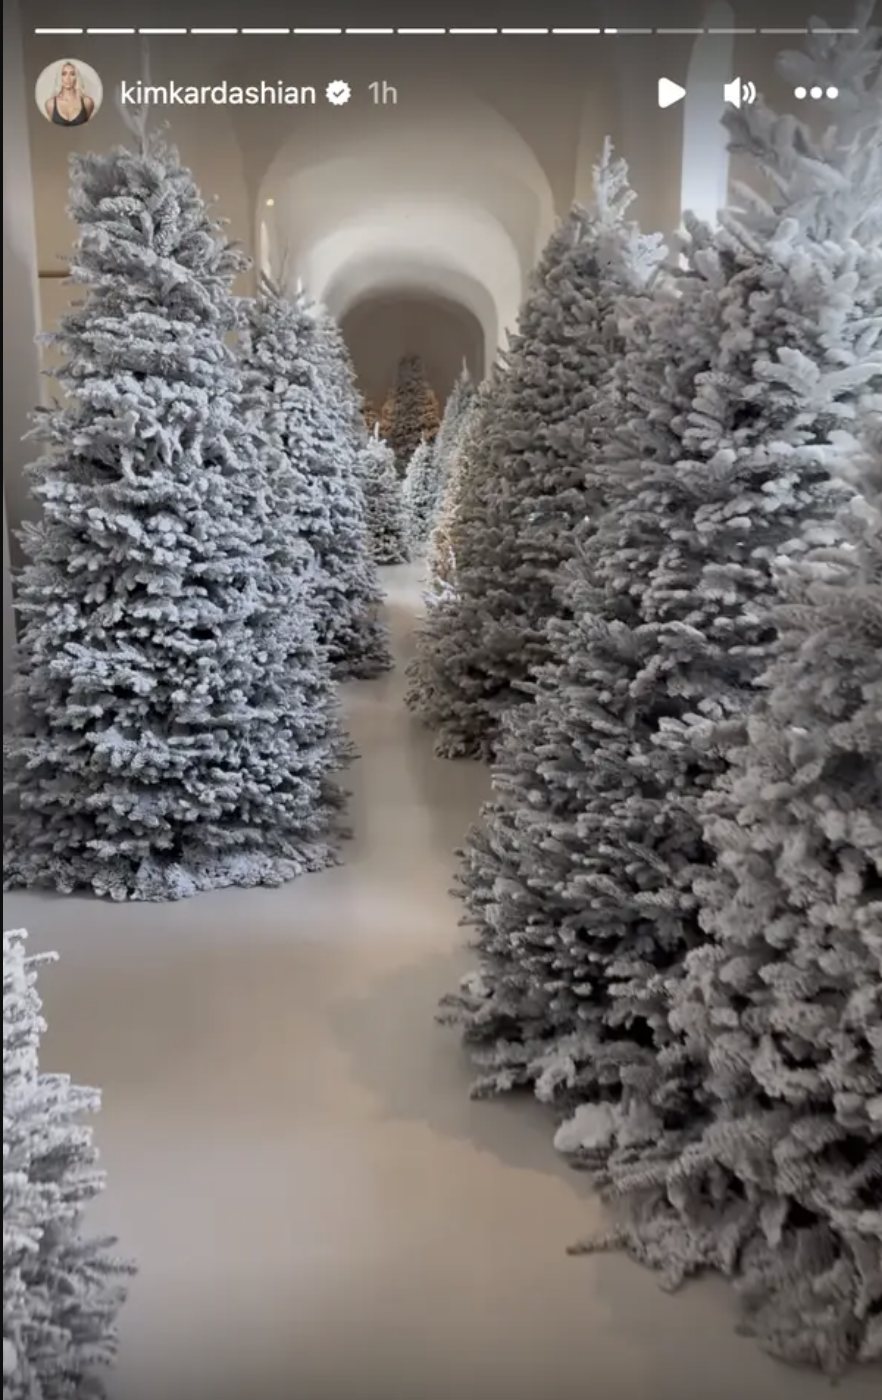 The hallway is filled with snowy Christmas trees